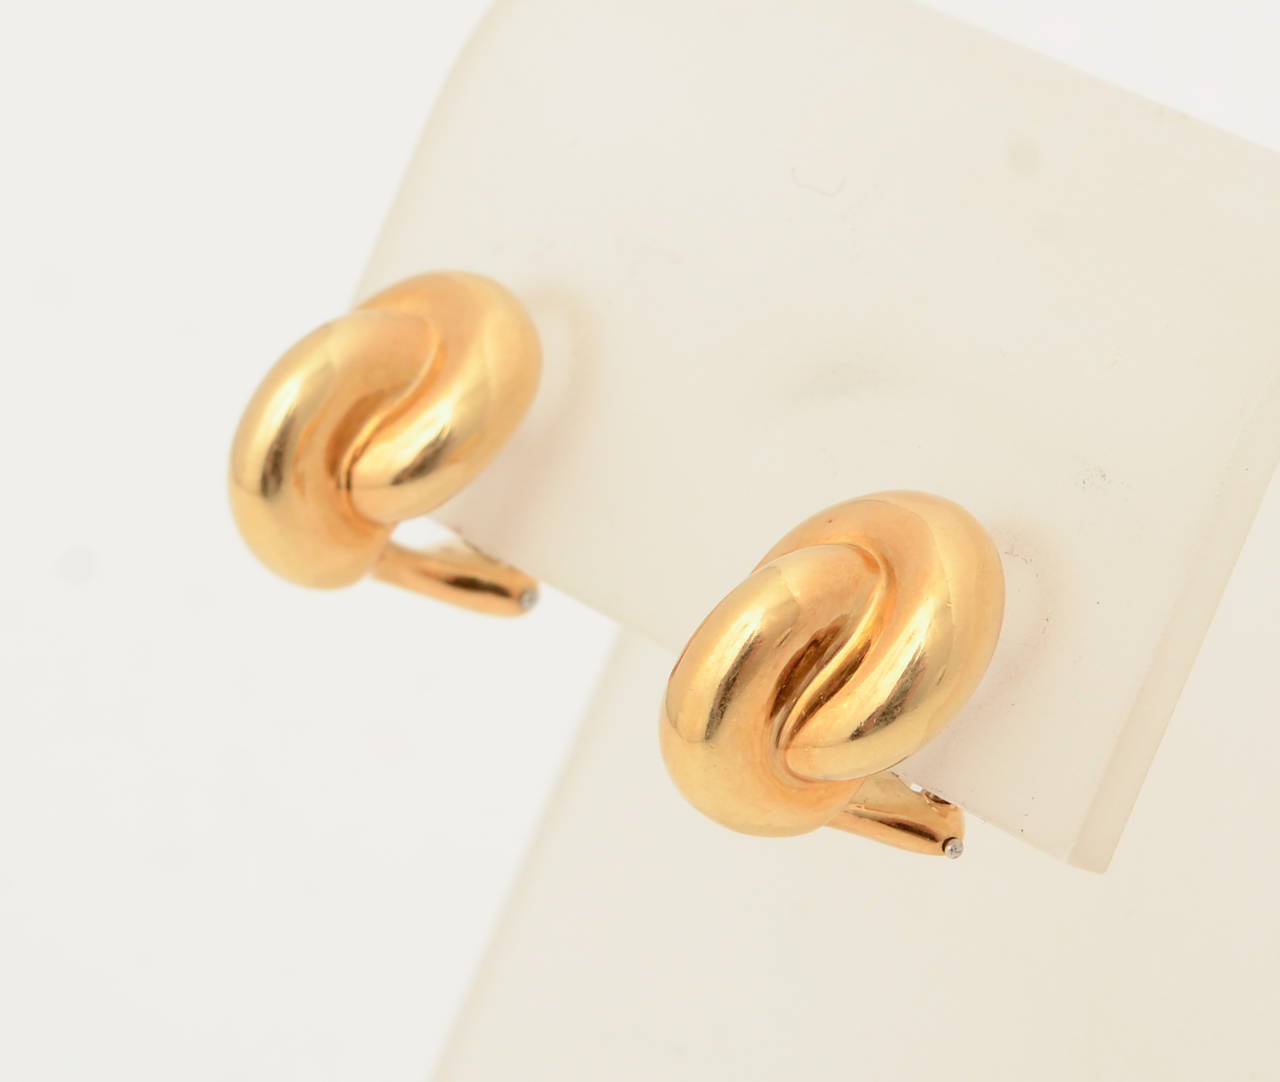 Small 18 karat gold earring by American designer, Angela Cummings. Two ovals intertwine at right angles. They measure 7/16